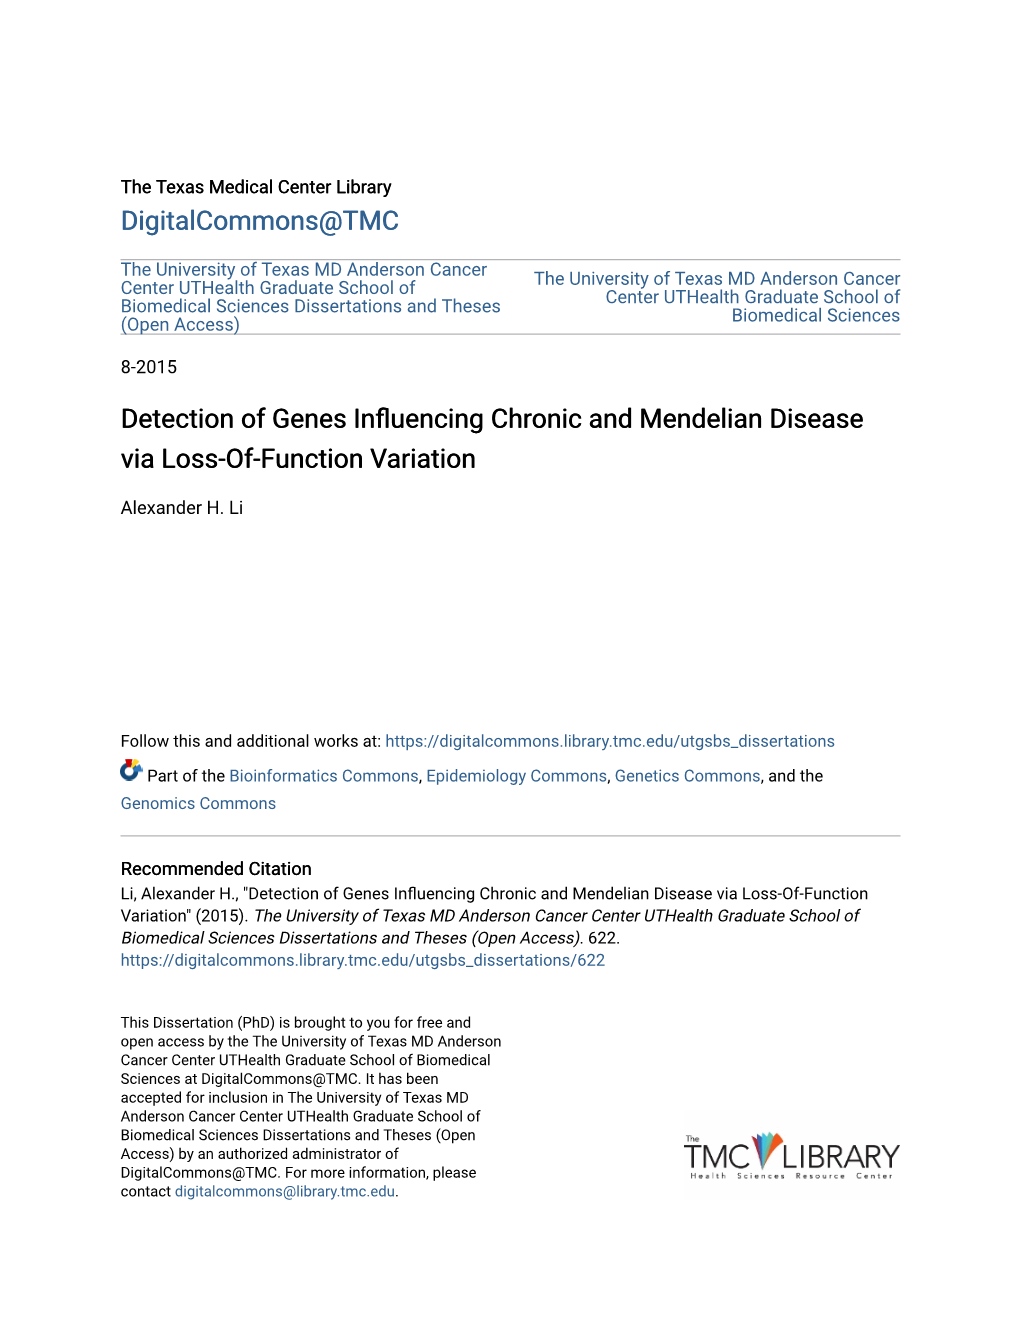 Detection of Genes Influencing Chronic and Mendelian Disease Via Loss-Of-Function Variation